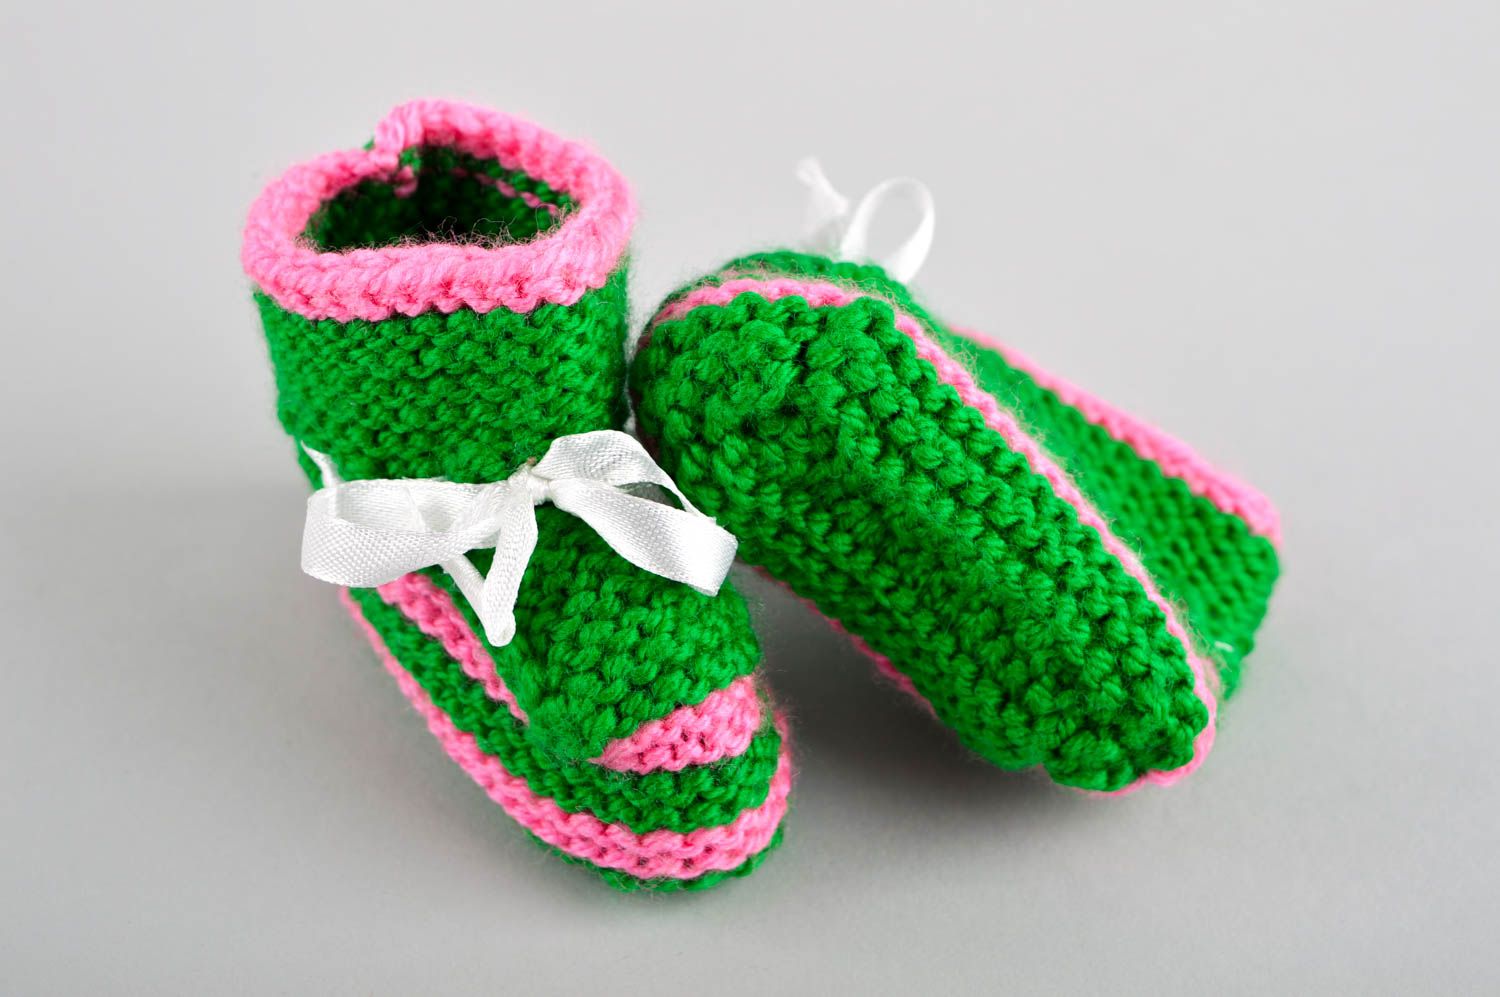 Handmade baby shoes crochet baby shoes baby socks goods for children kids gifts photo 4